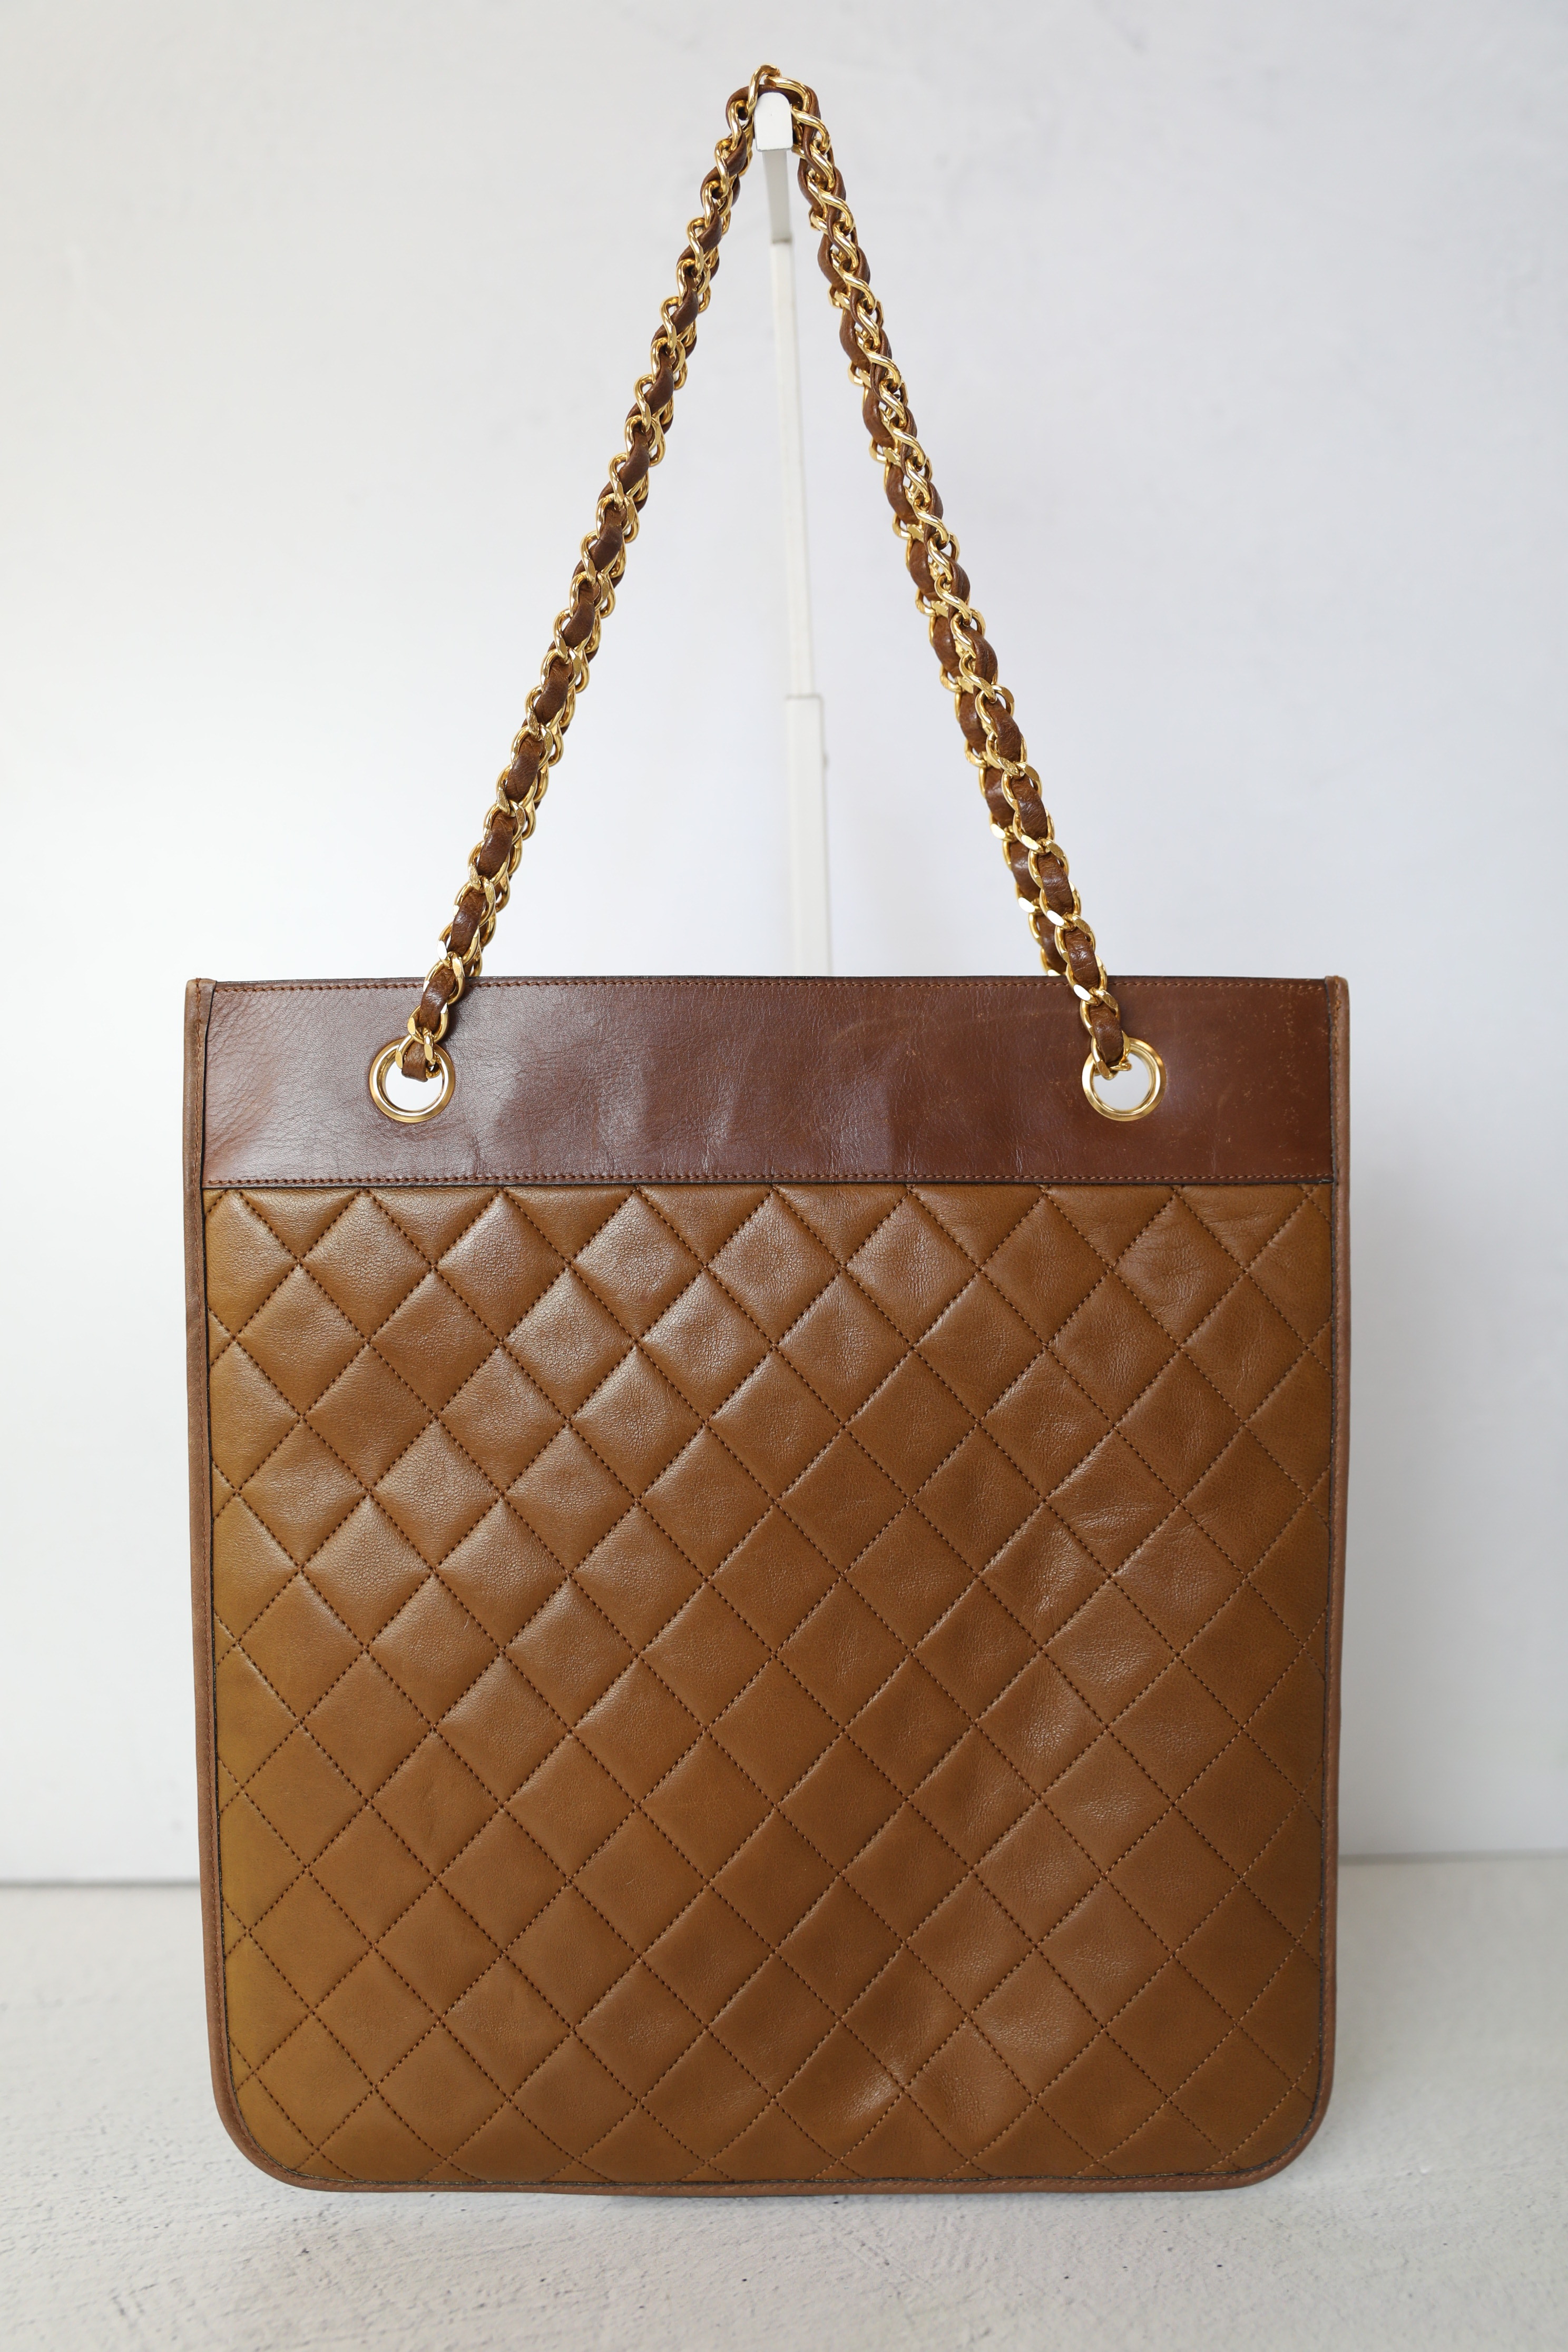 Chanel Vintage Flat Chain Tote, Brown Lambskin with Gold Hardware, Preowned  No Dustbag WA001